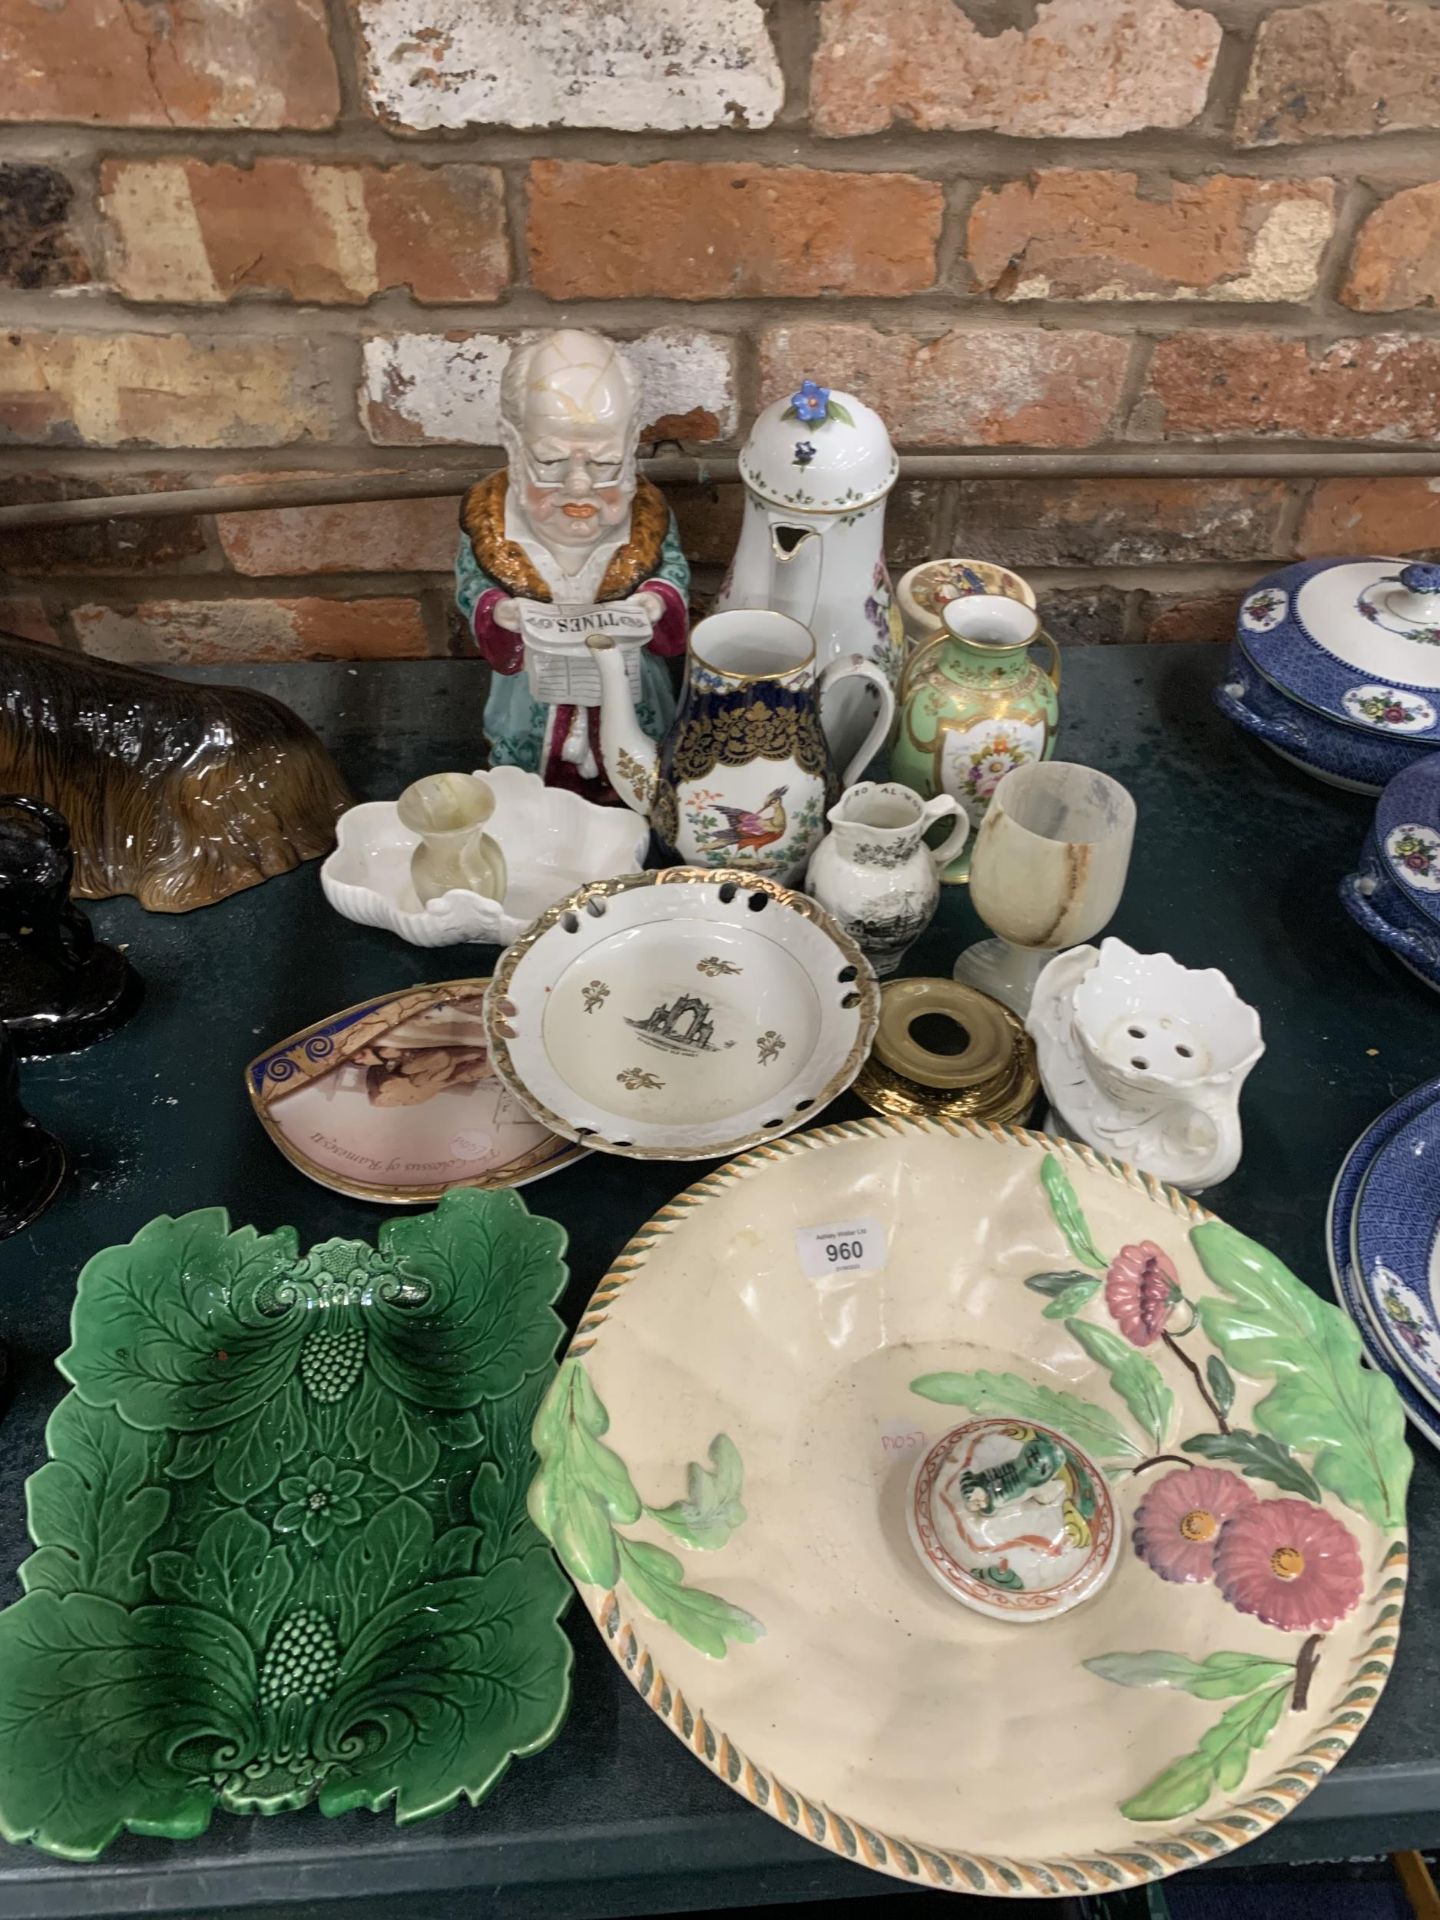 A MIXED LOT OF VINTAGE CERAMICS TO INCLUDE A COFFEE POT, VASE, JUGS, PLATES, ETC